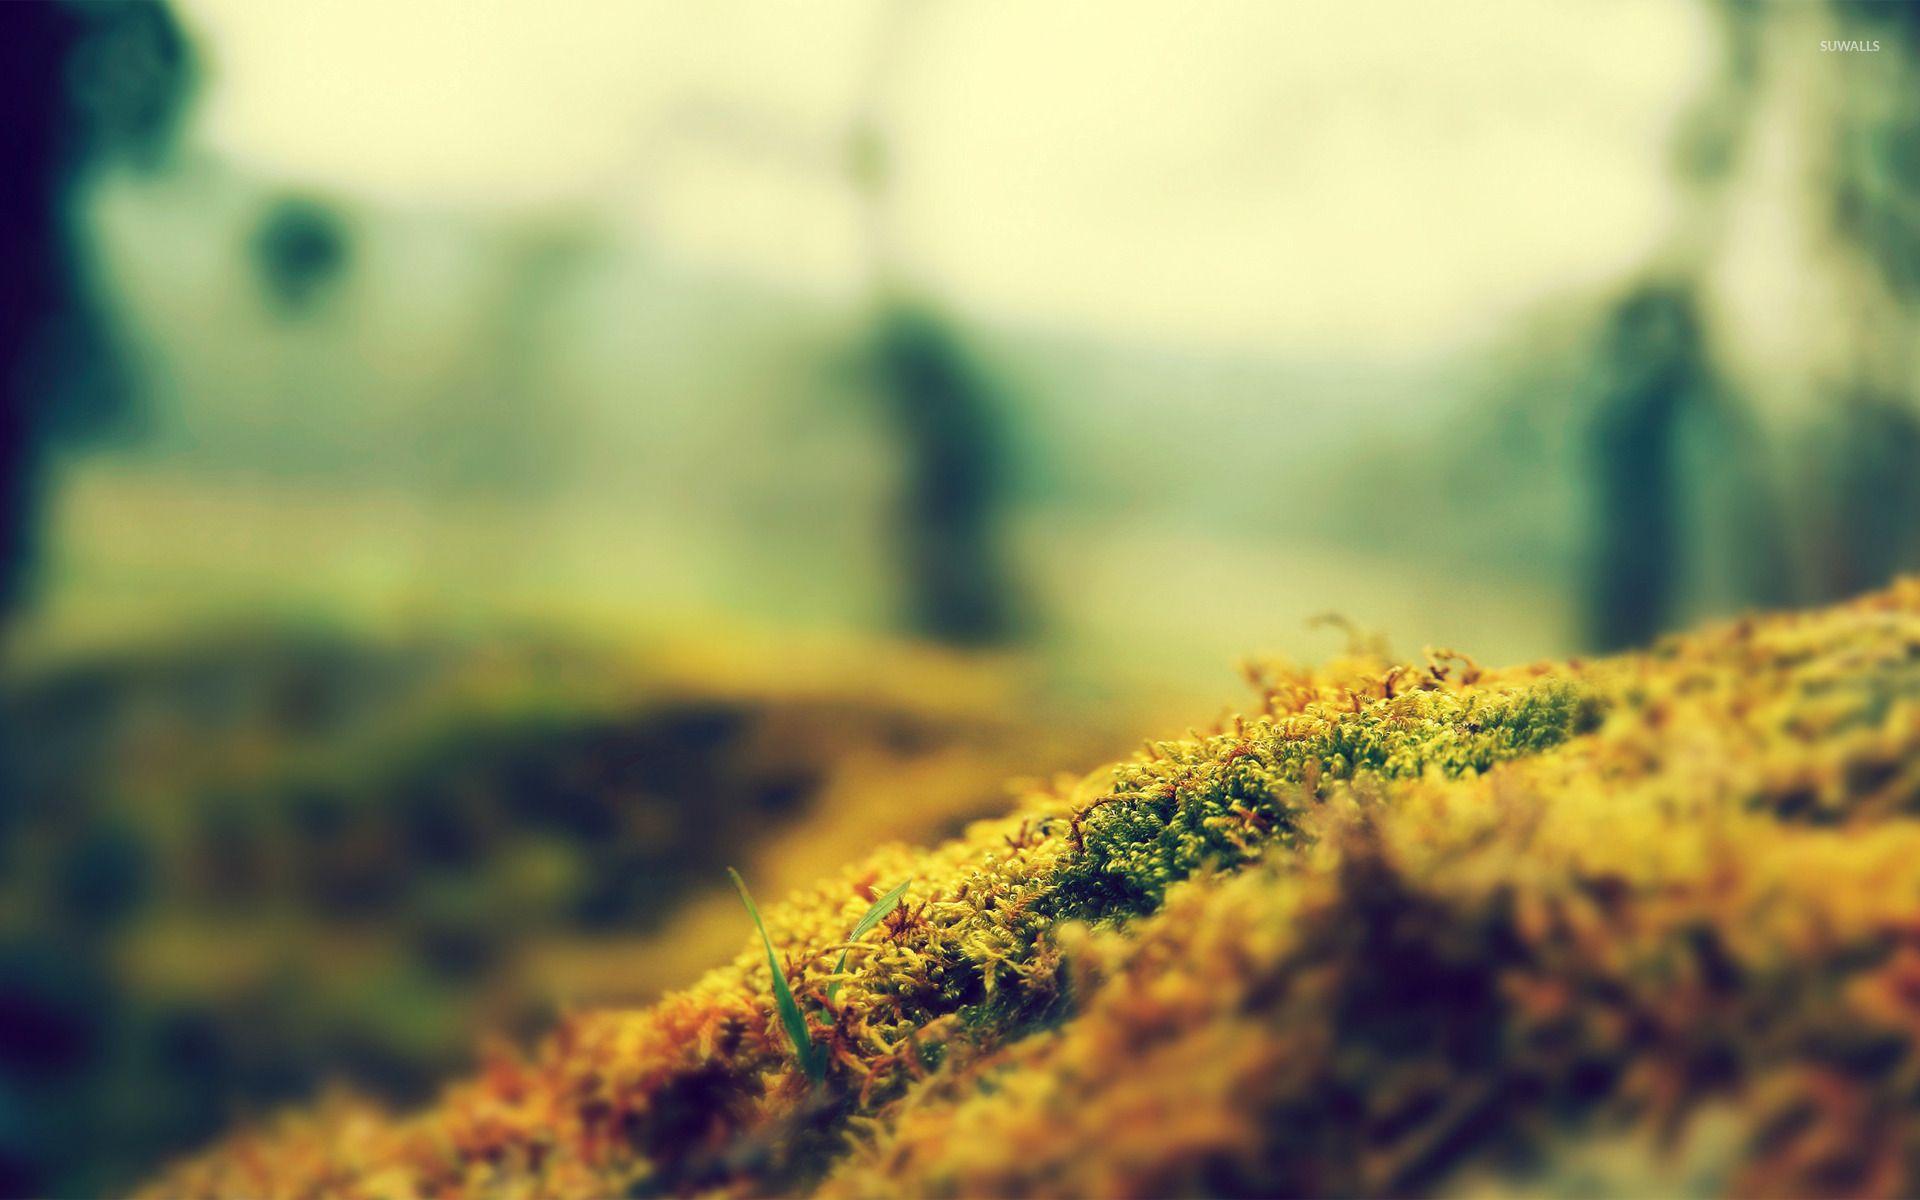 Moss HD Wallpaper for Android